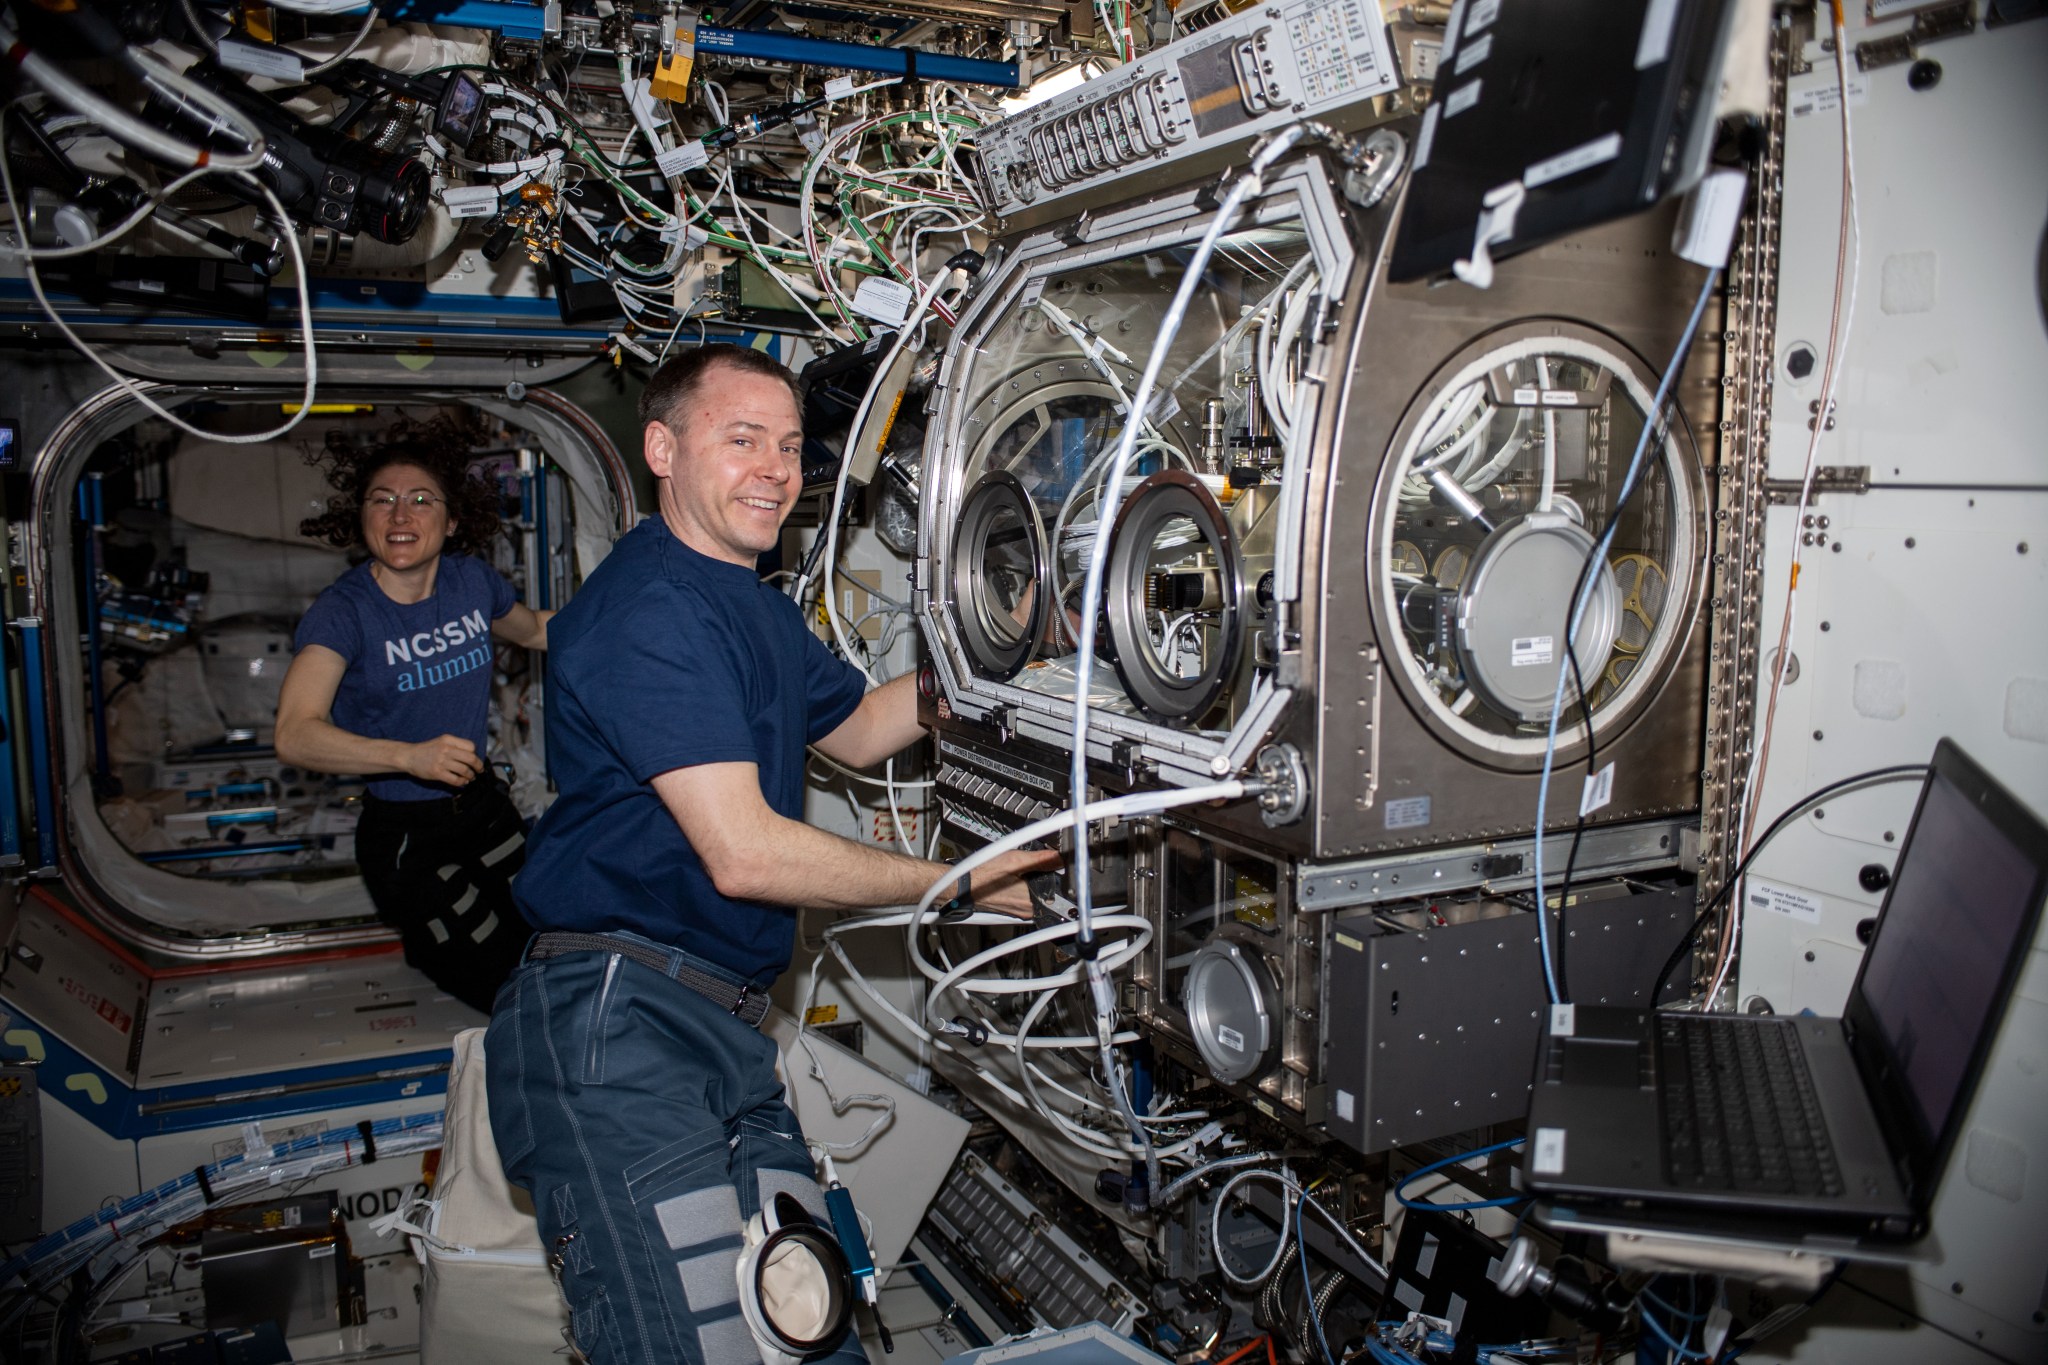 astronaut Nick Hague works on the Ring Sheared Drop investigation inside the space station